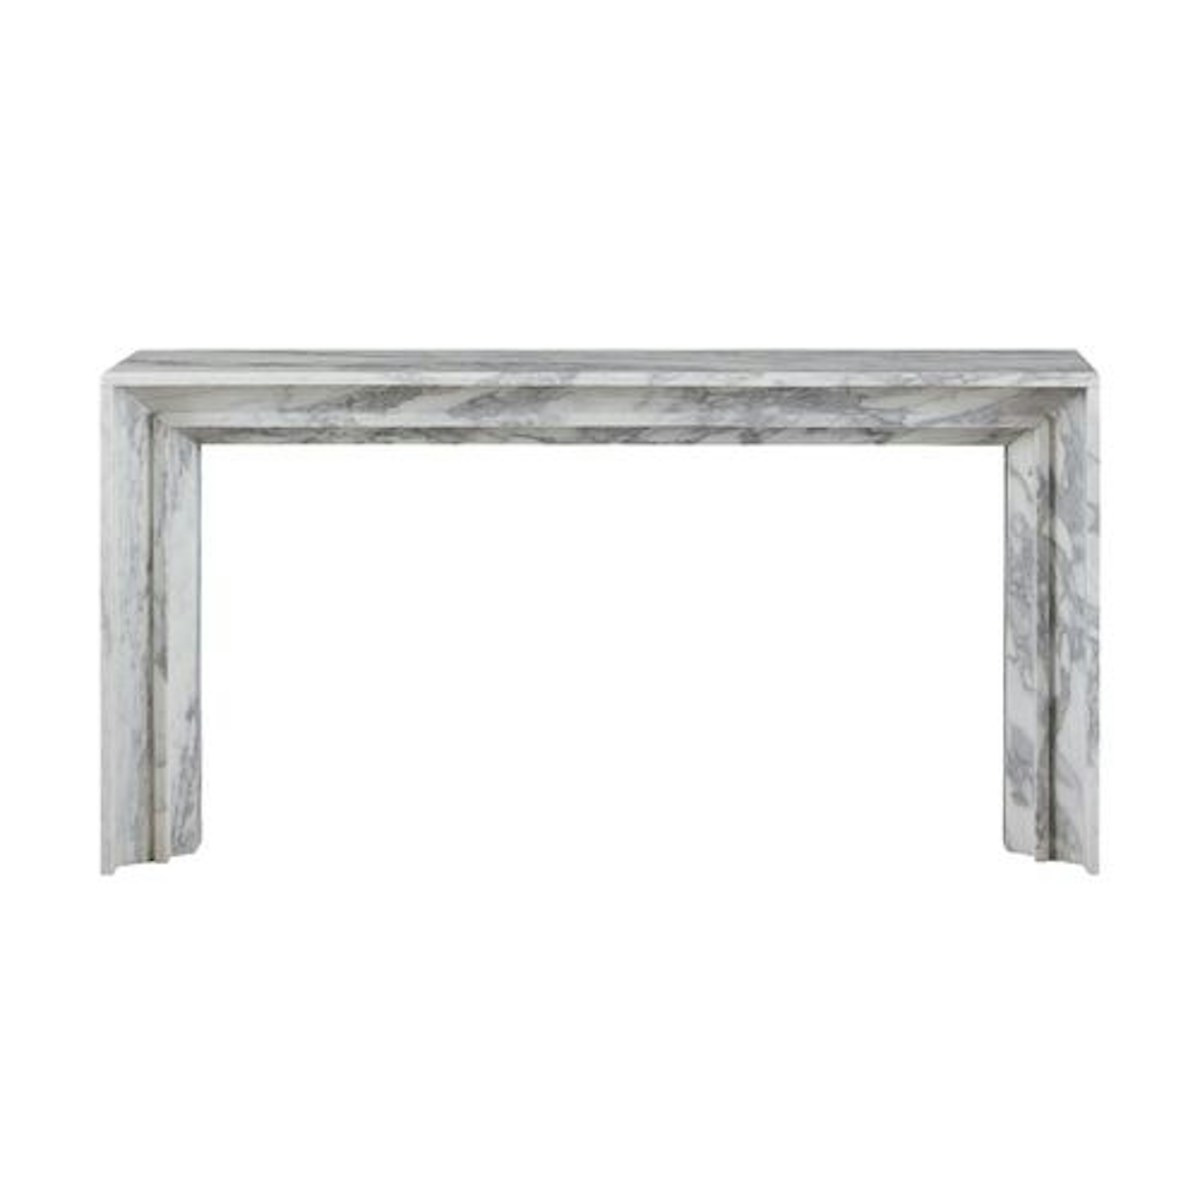 Marble console table | Shop console tables online at LuxDeco.com